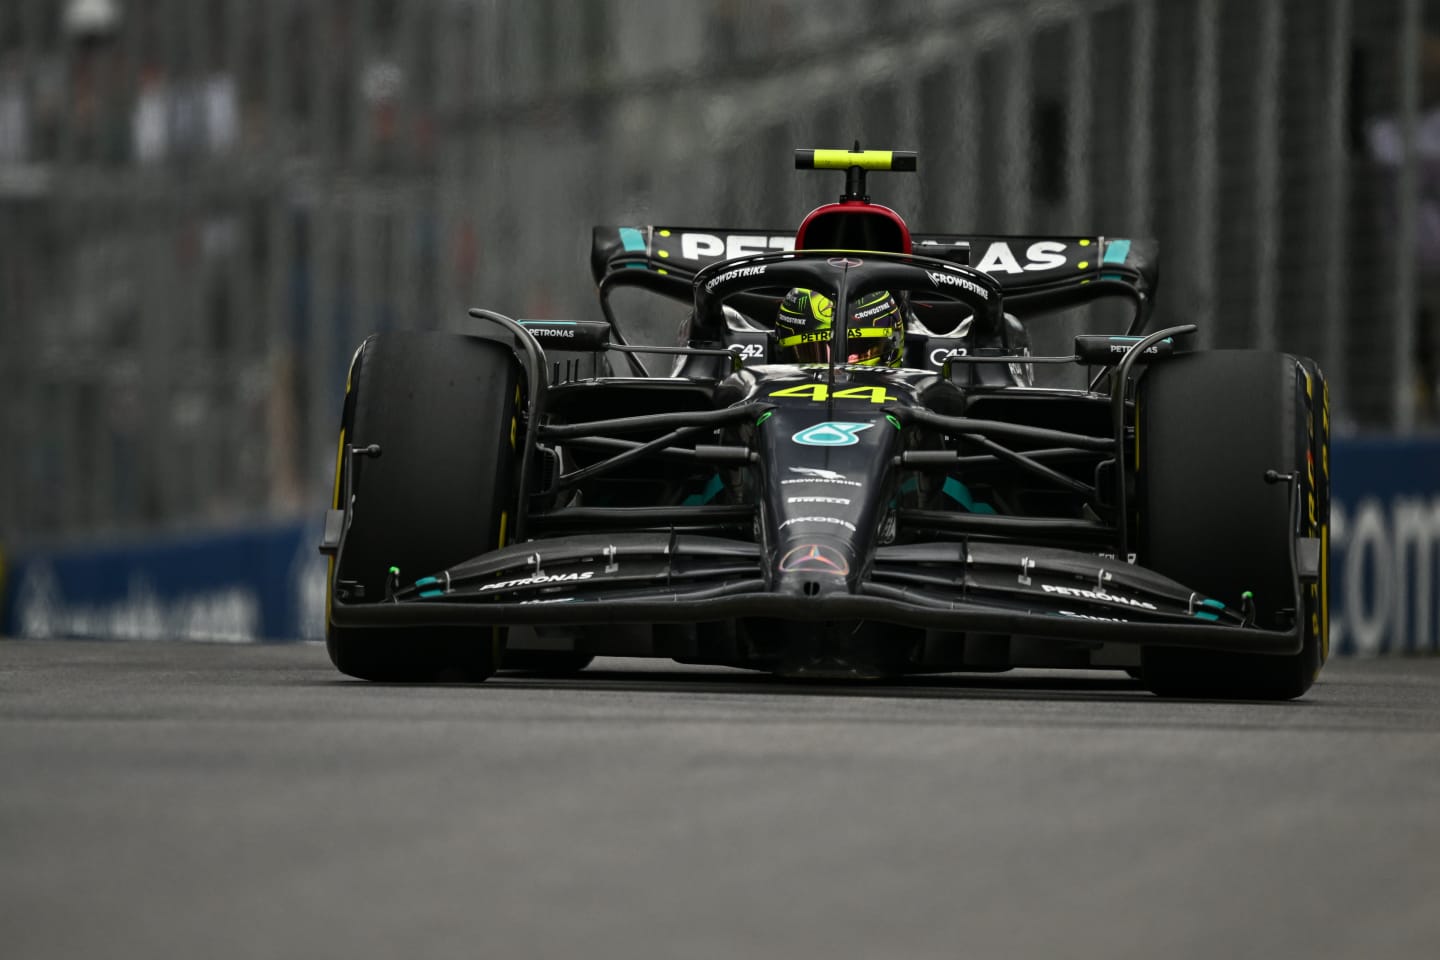 MONTREAL, QUEBEC - JUNE 18: Lewis Hamilton of Great Britain driving the (44) Mercedes AMG Petronas